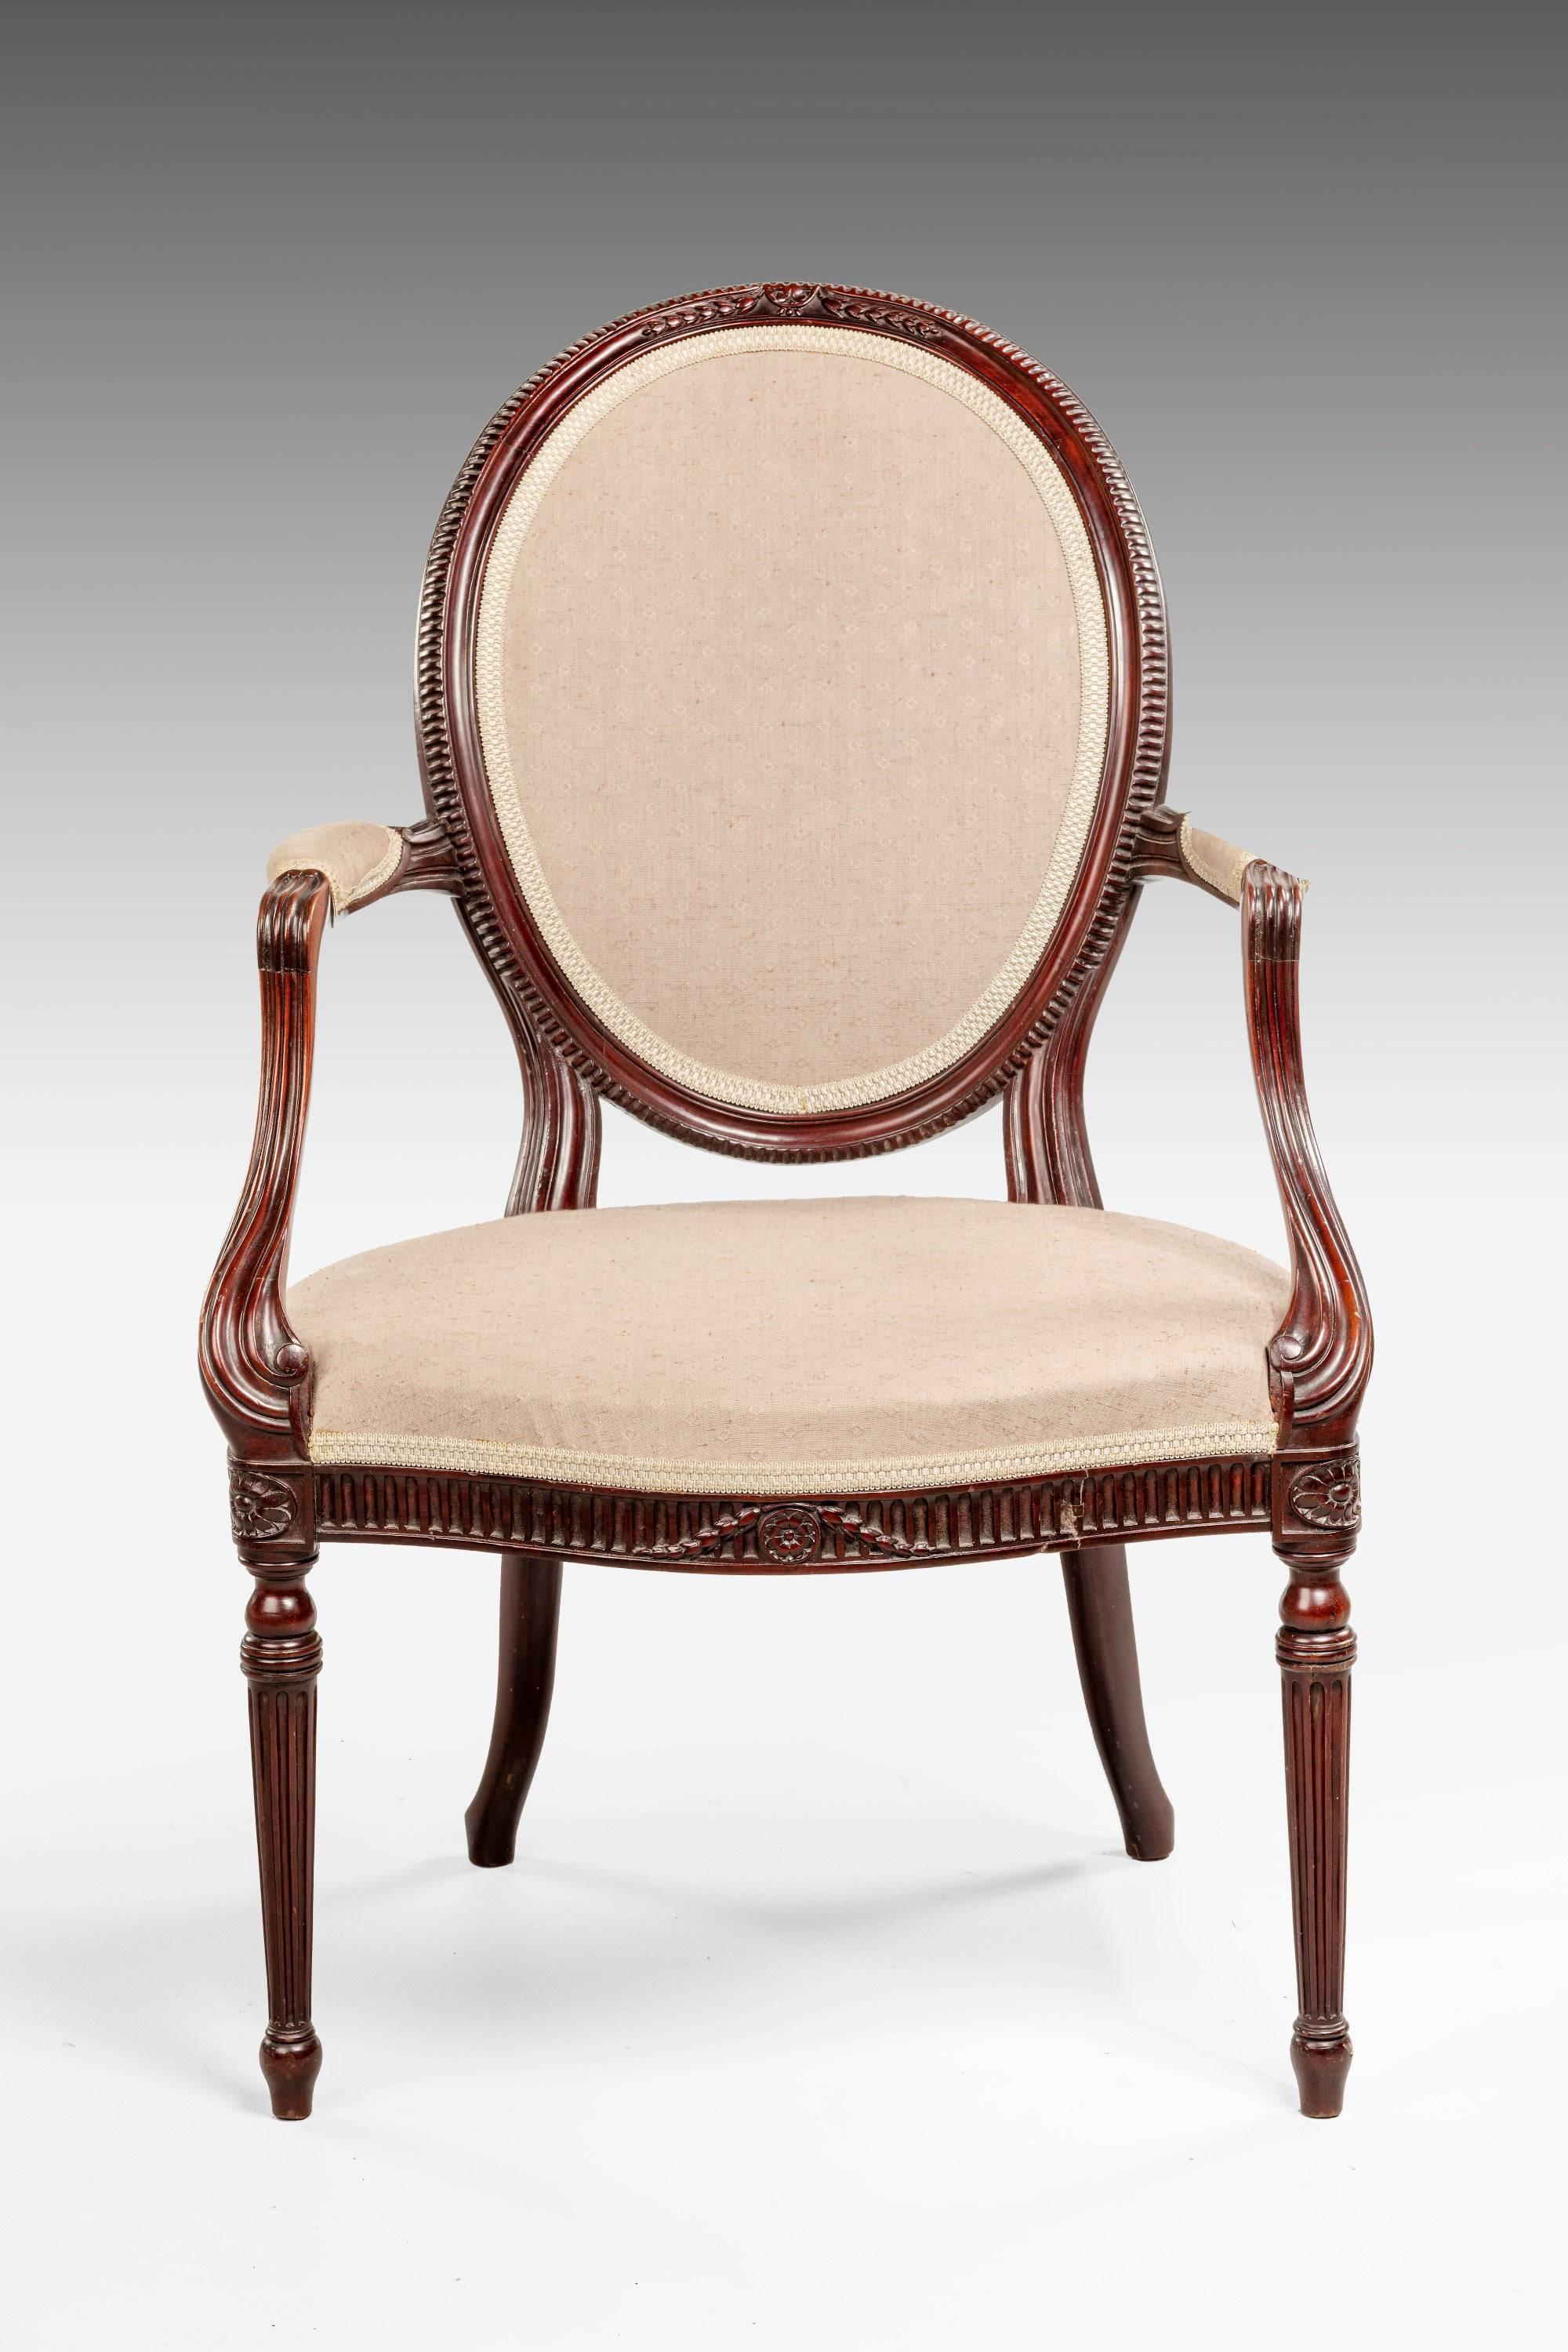 An elegant and well carved elbow chair showing Hepplewhite influence the oval back with continuous ribbed detail. The supports with swept sections, serpentine front with husk carving.

